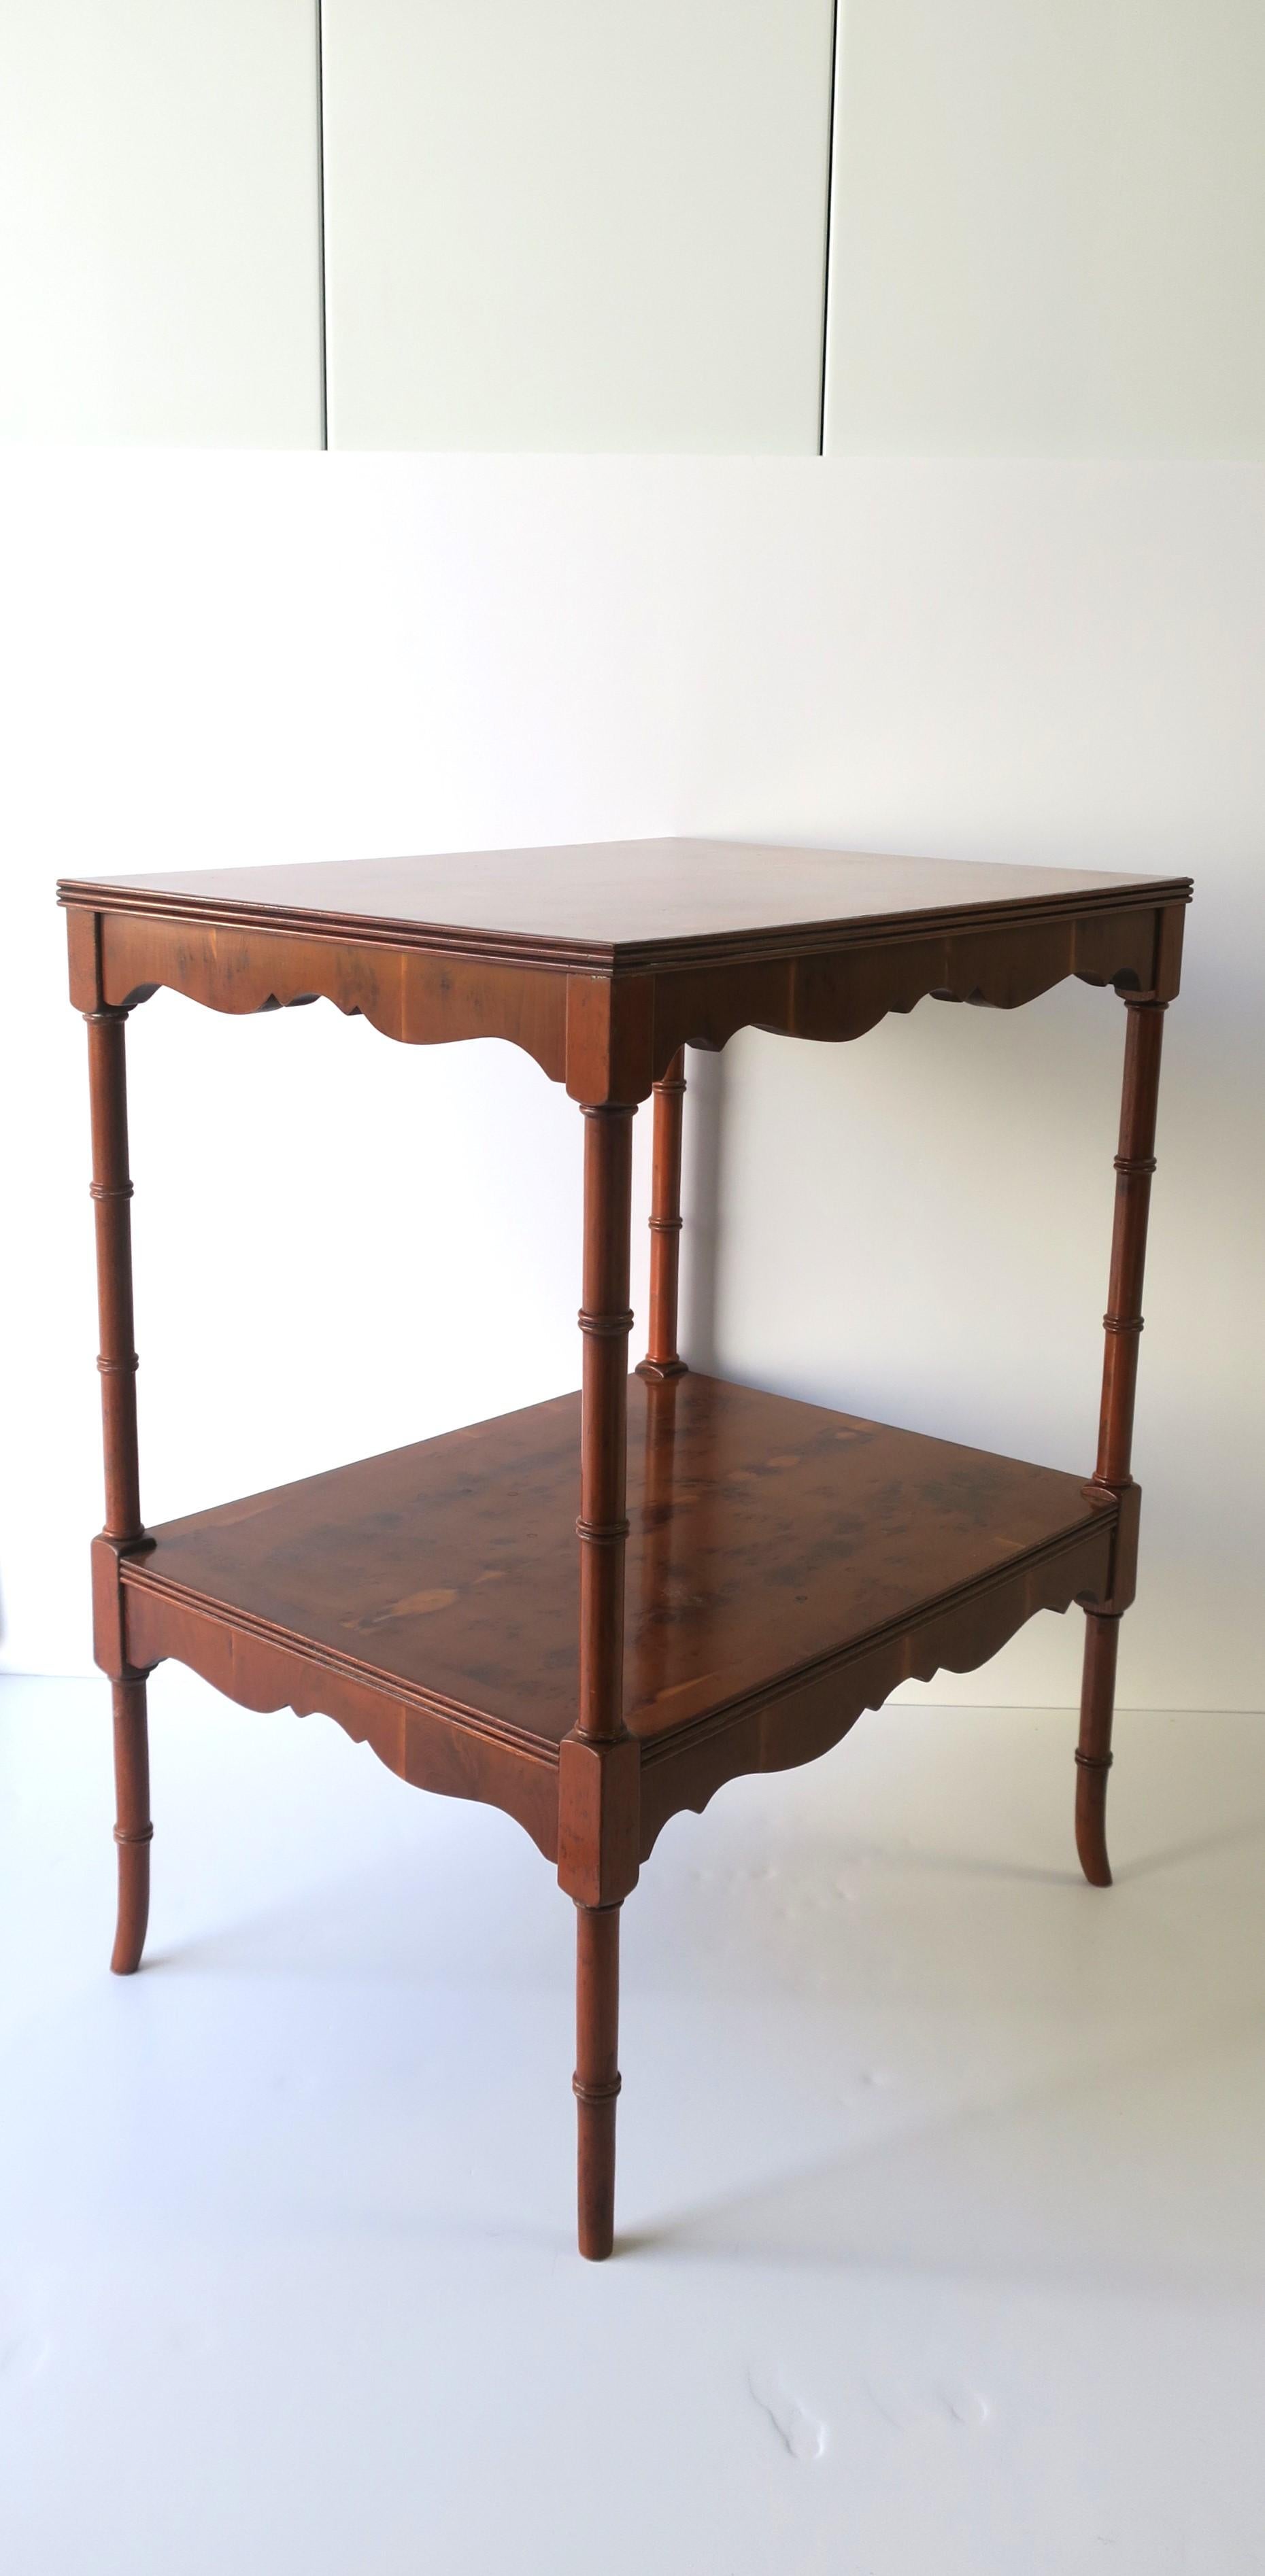 20th Century English Birdseye Maple Wood Side or End Table with Shelf and Bamboo-Esque Legs For Sale